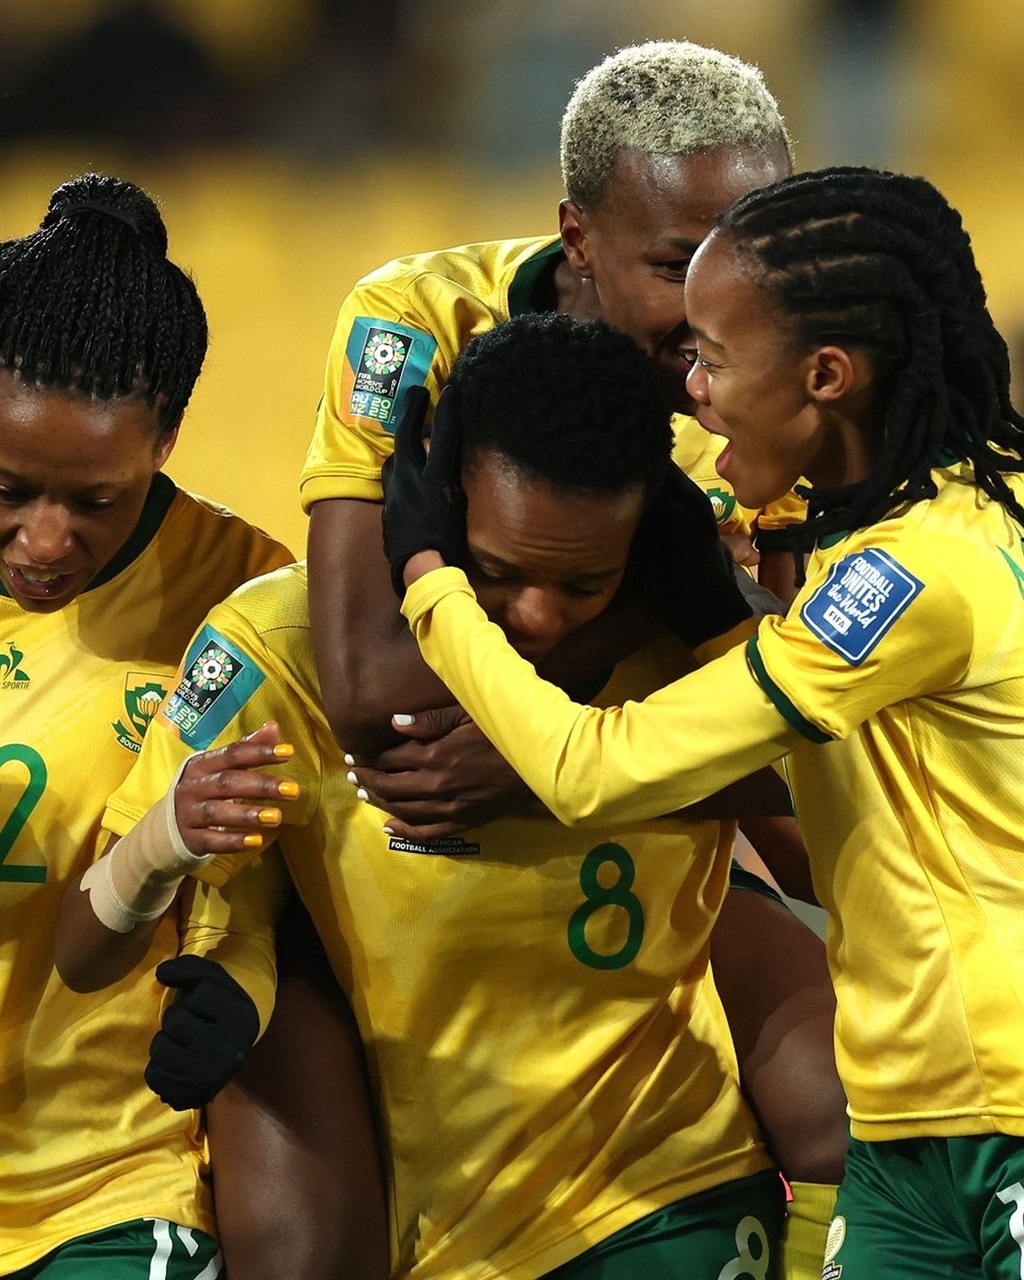 Banyana Banyana are currently staying at one of th